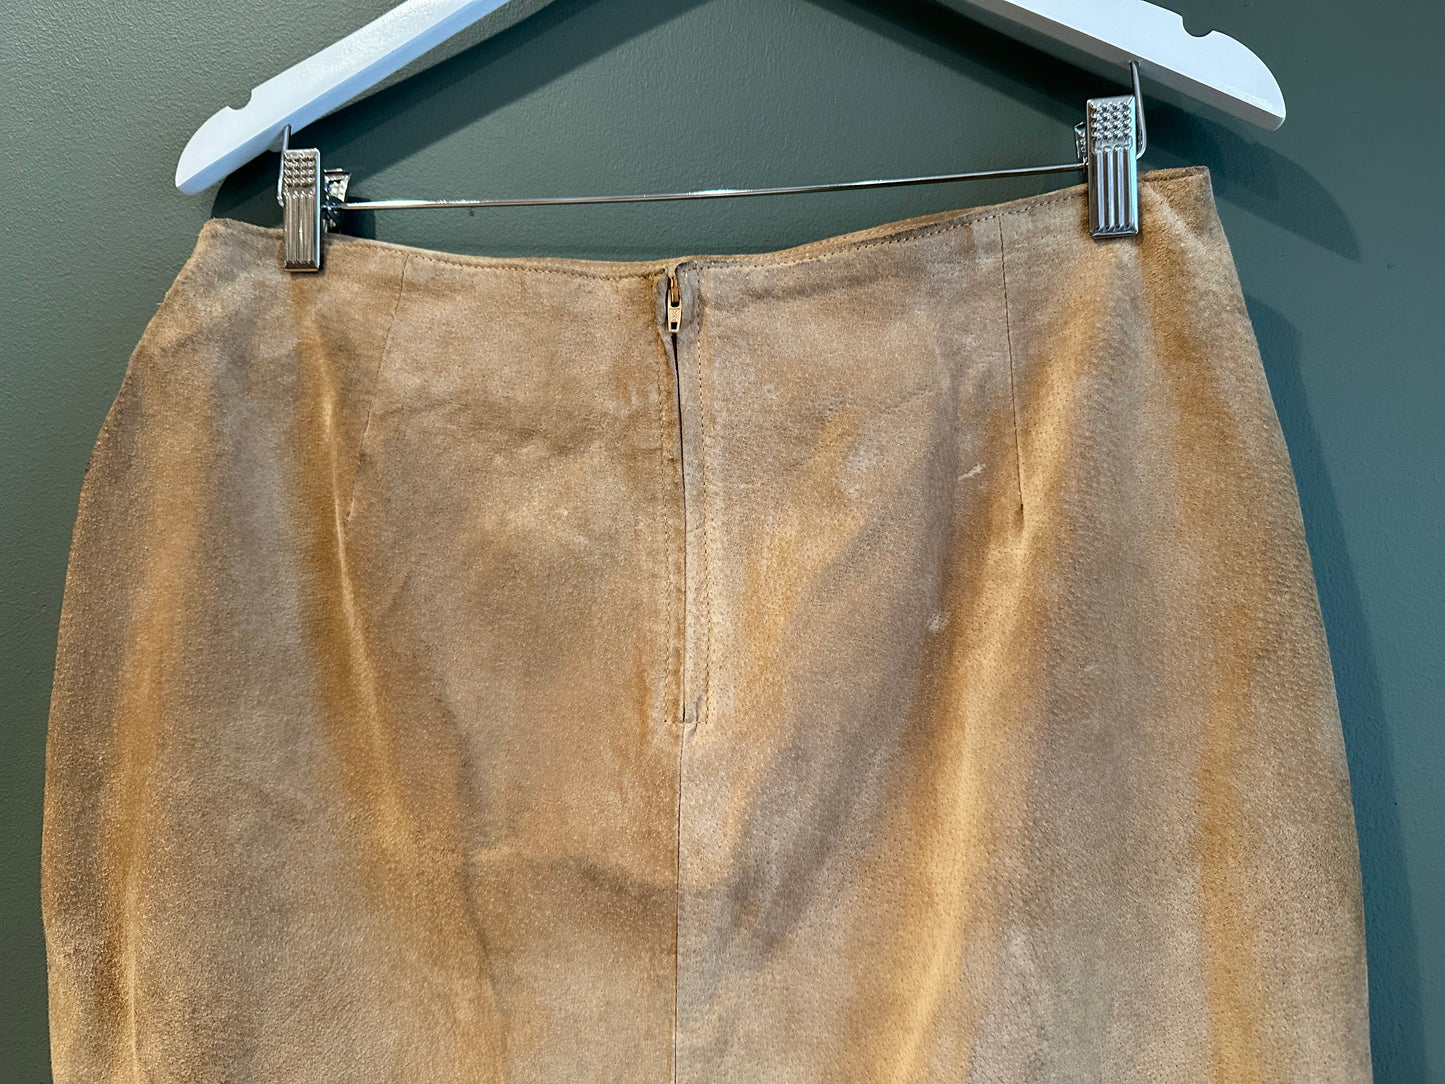 Suede Skirt, 1990's, 30" Waist, as is